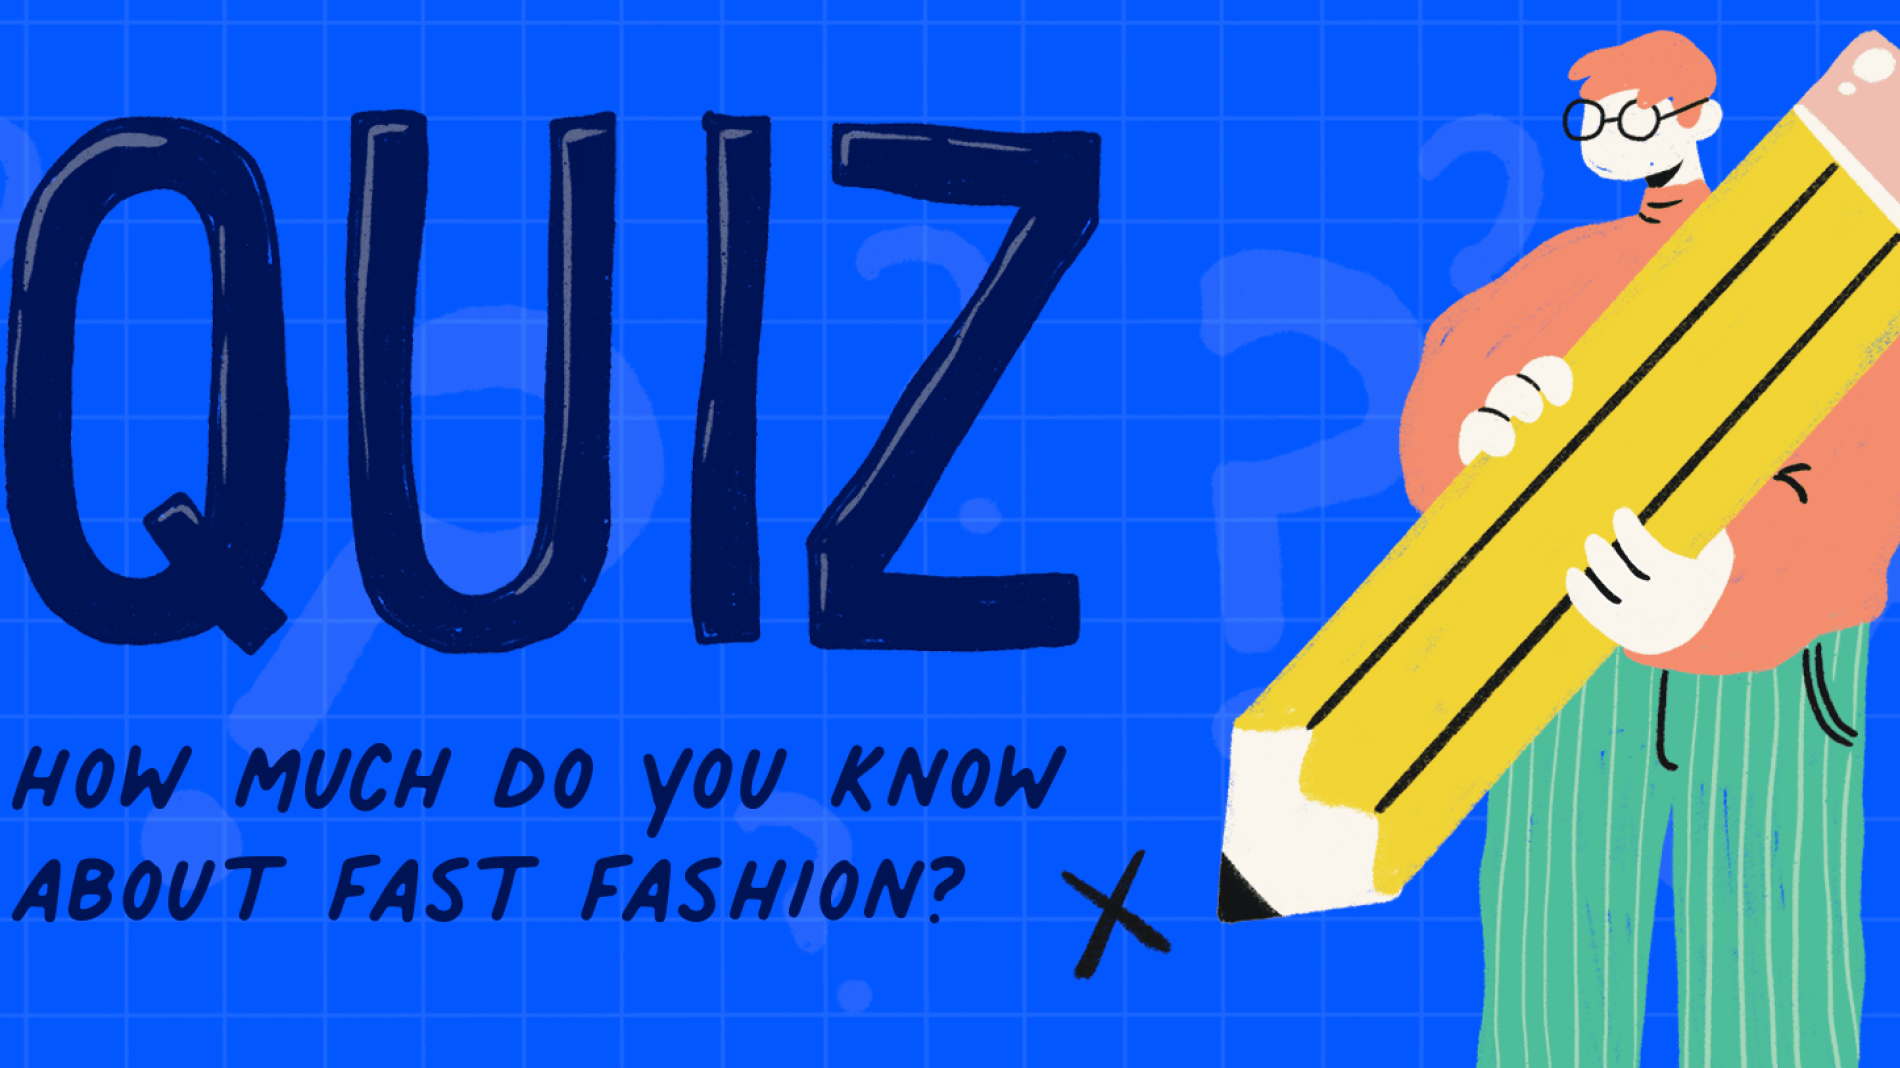 Illustration of a person holding a pencil next to the words 'QUIZ: how much do you know about fast fashion?